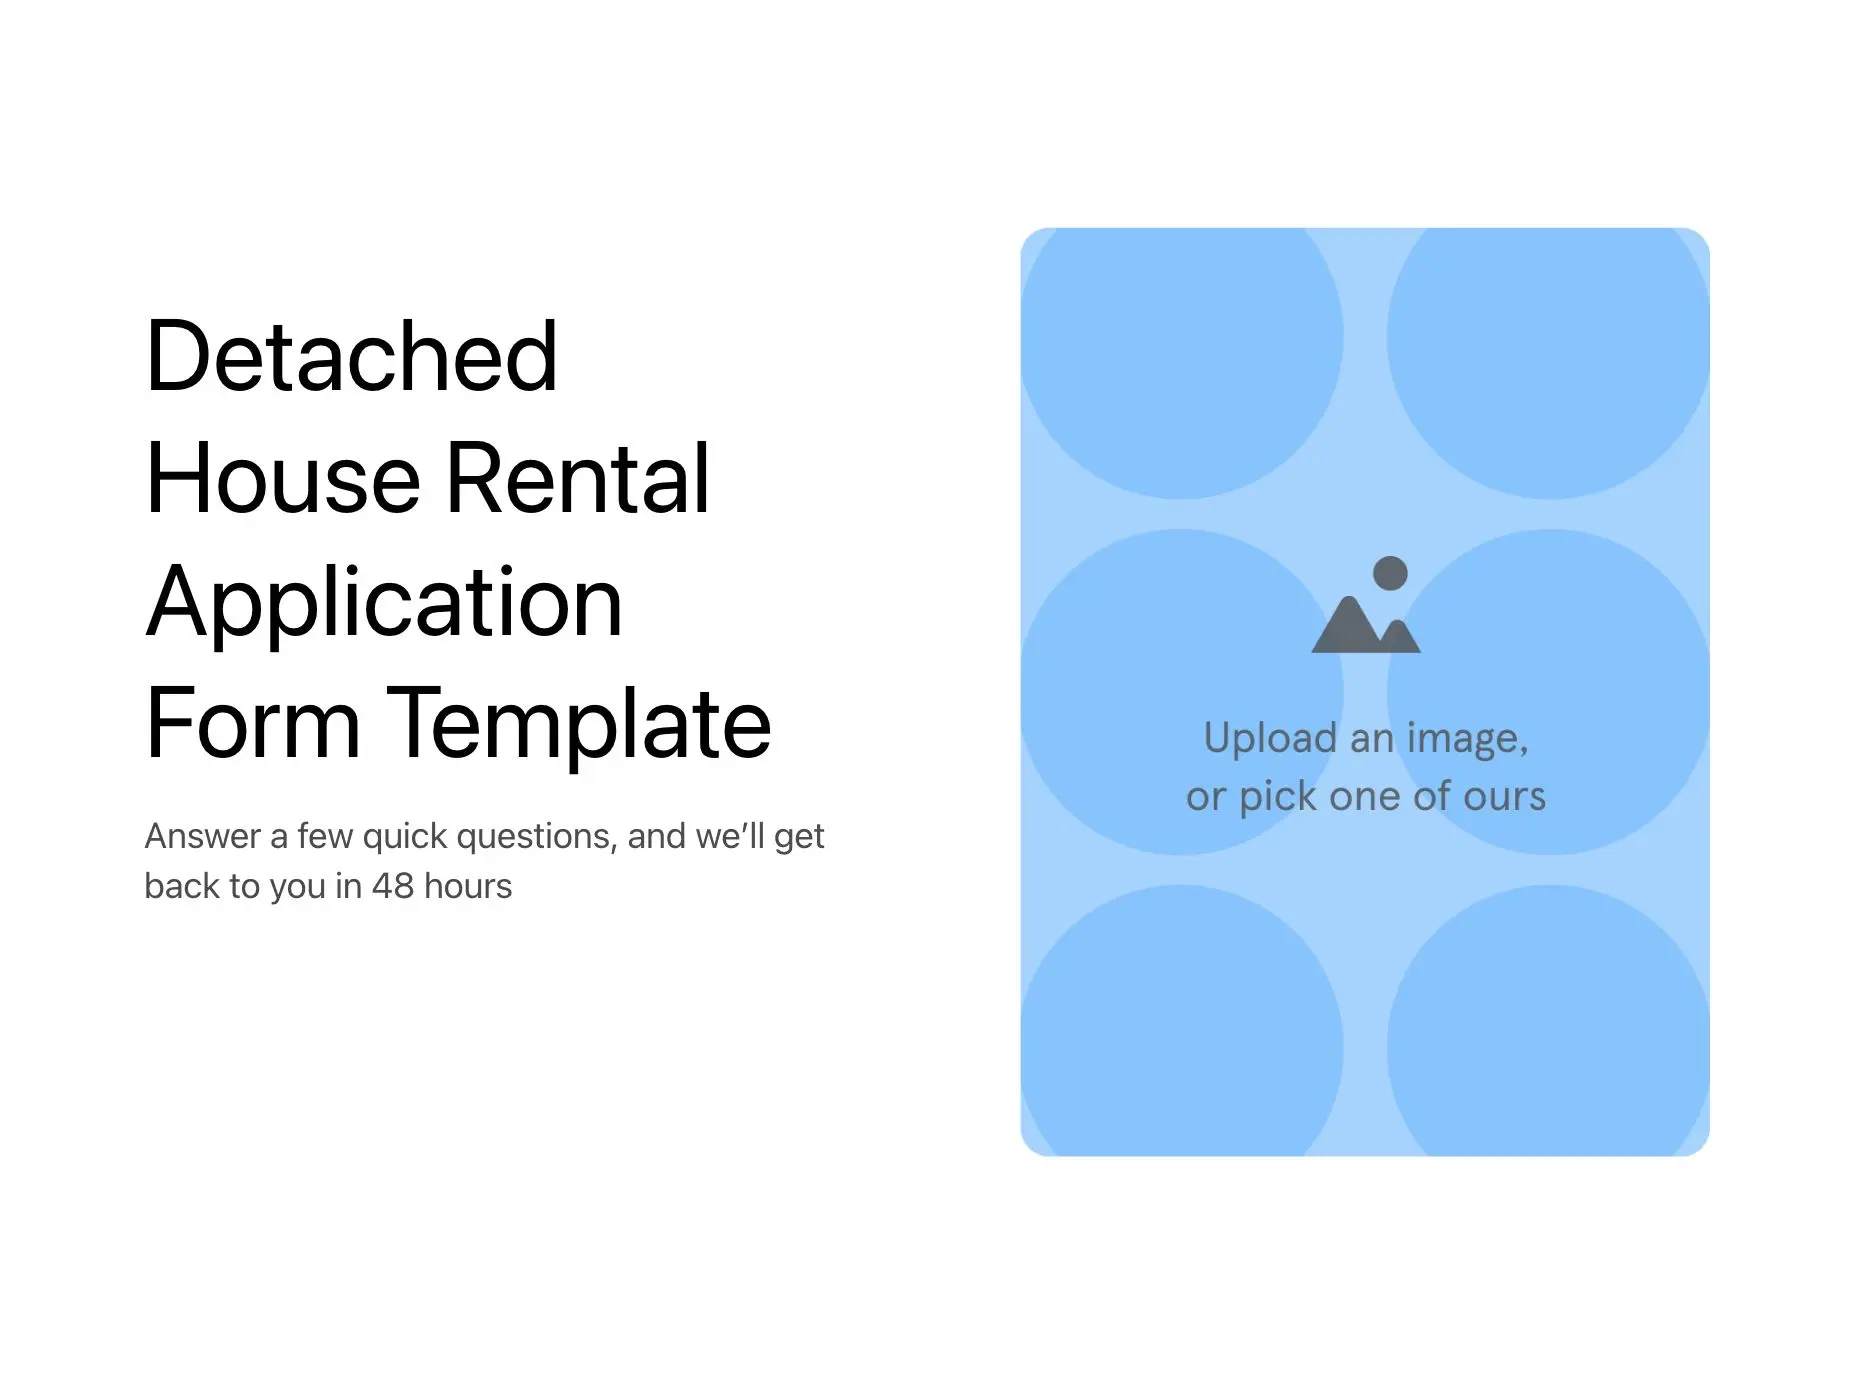 Detached House Rental Application Form Template Hero